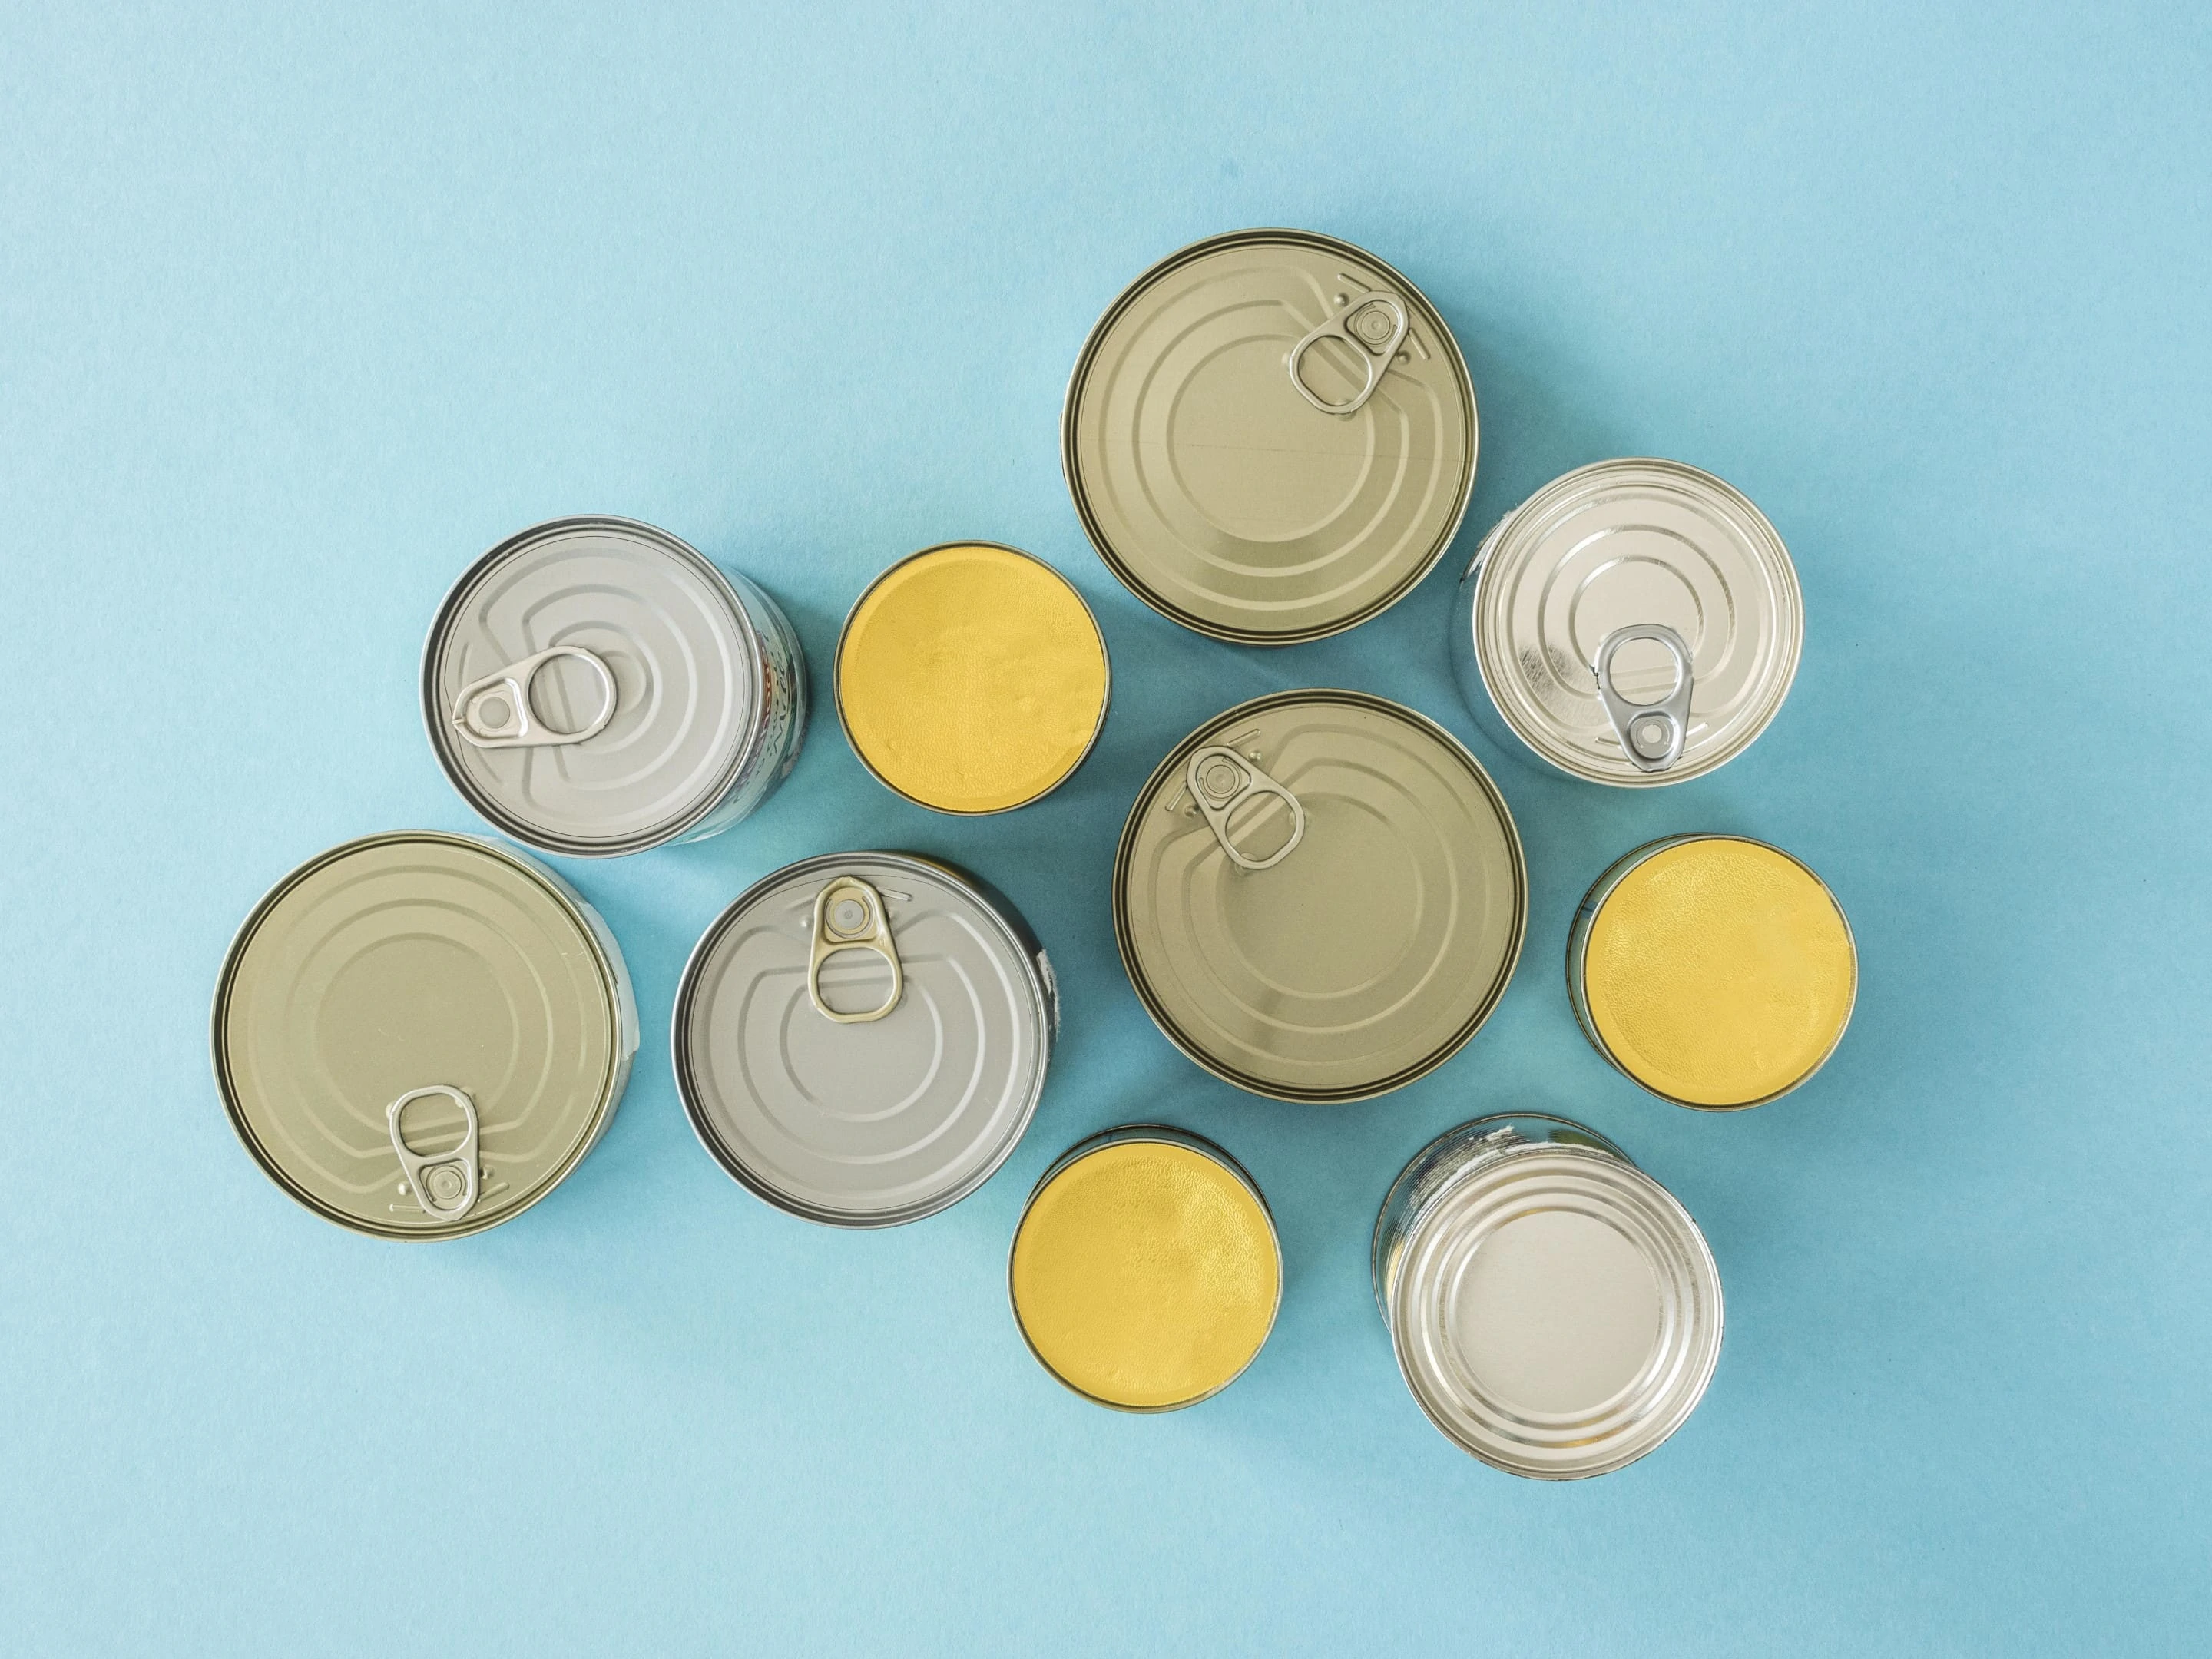 Top view of canned food on blue background